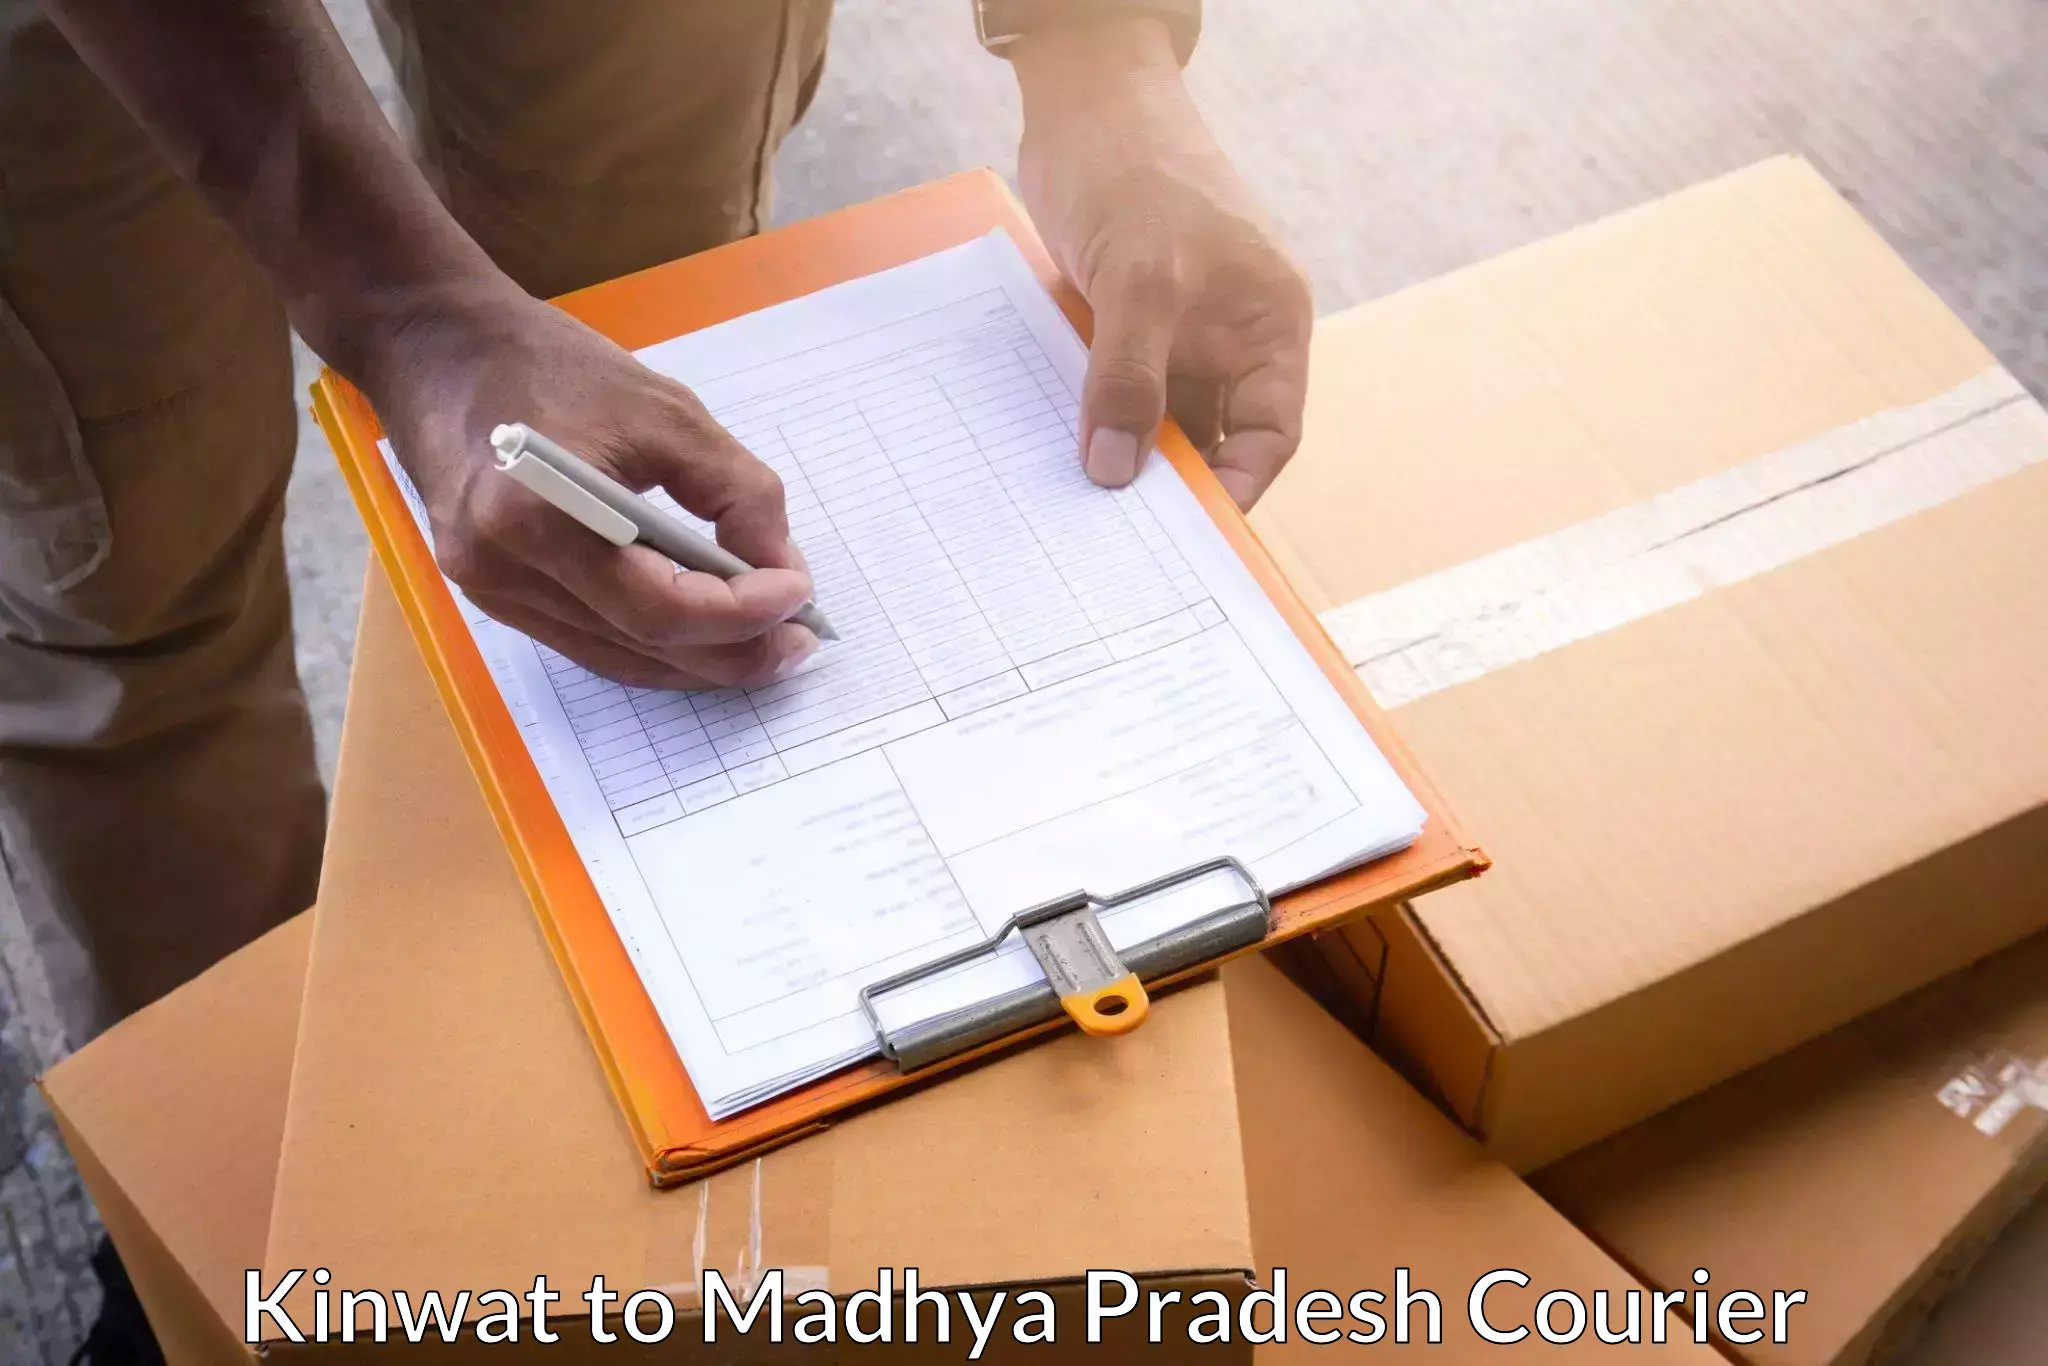 Professional courier services in Kinwat to BHEL Bhopal